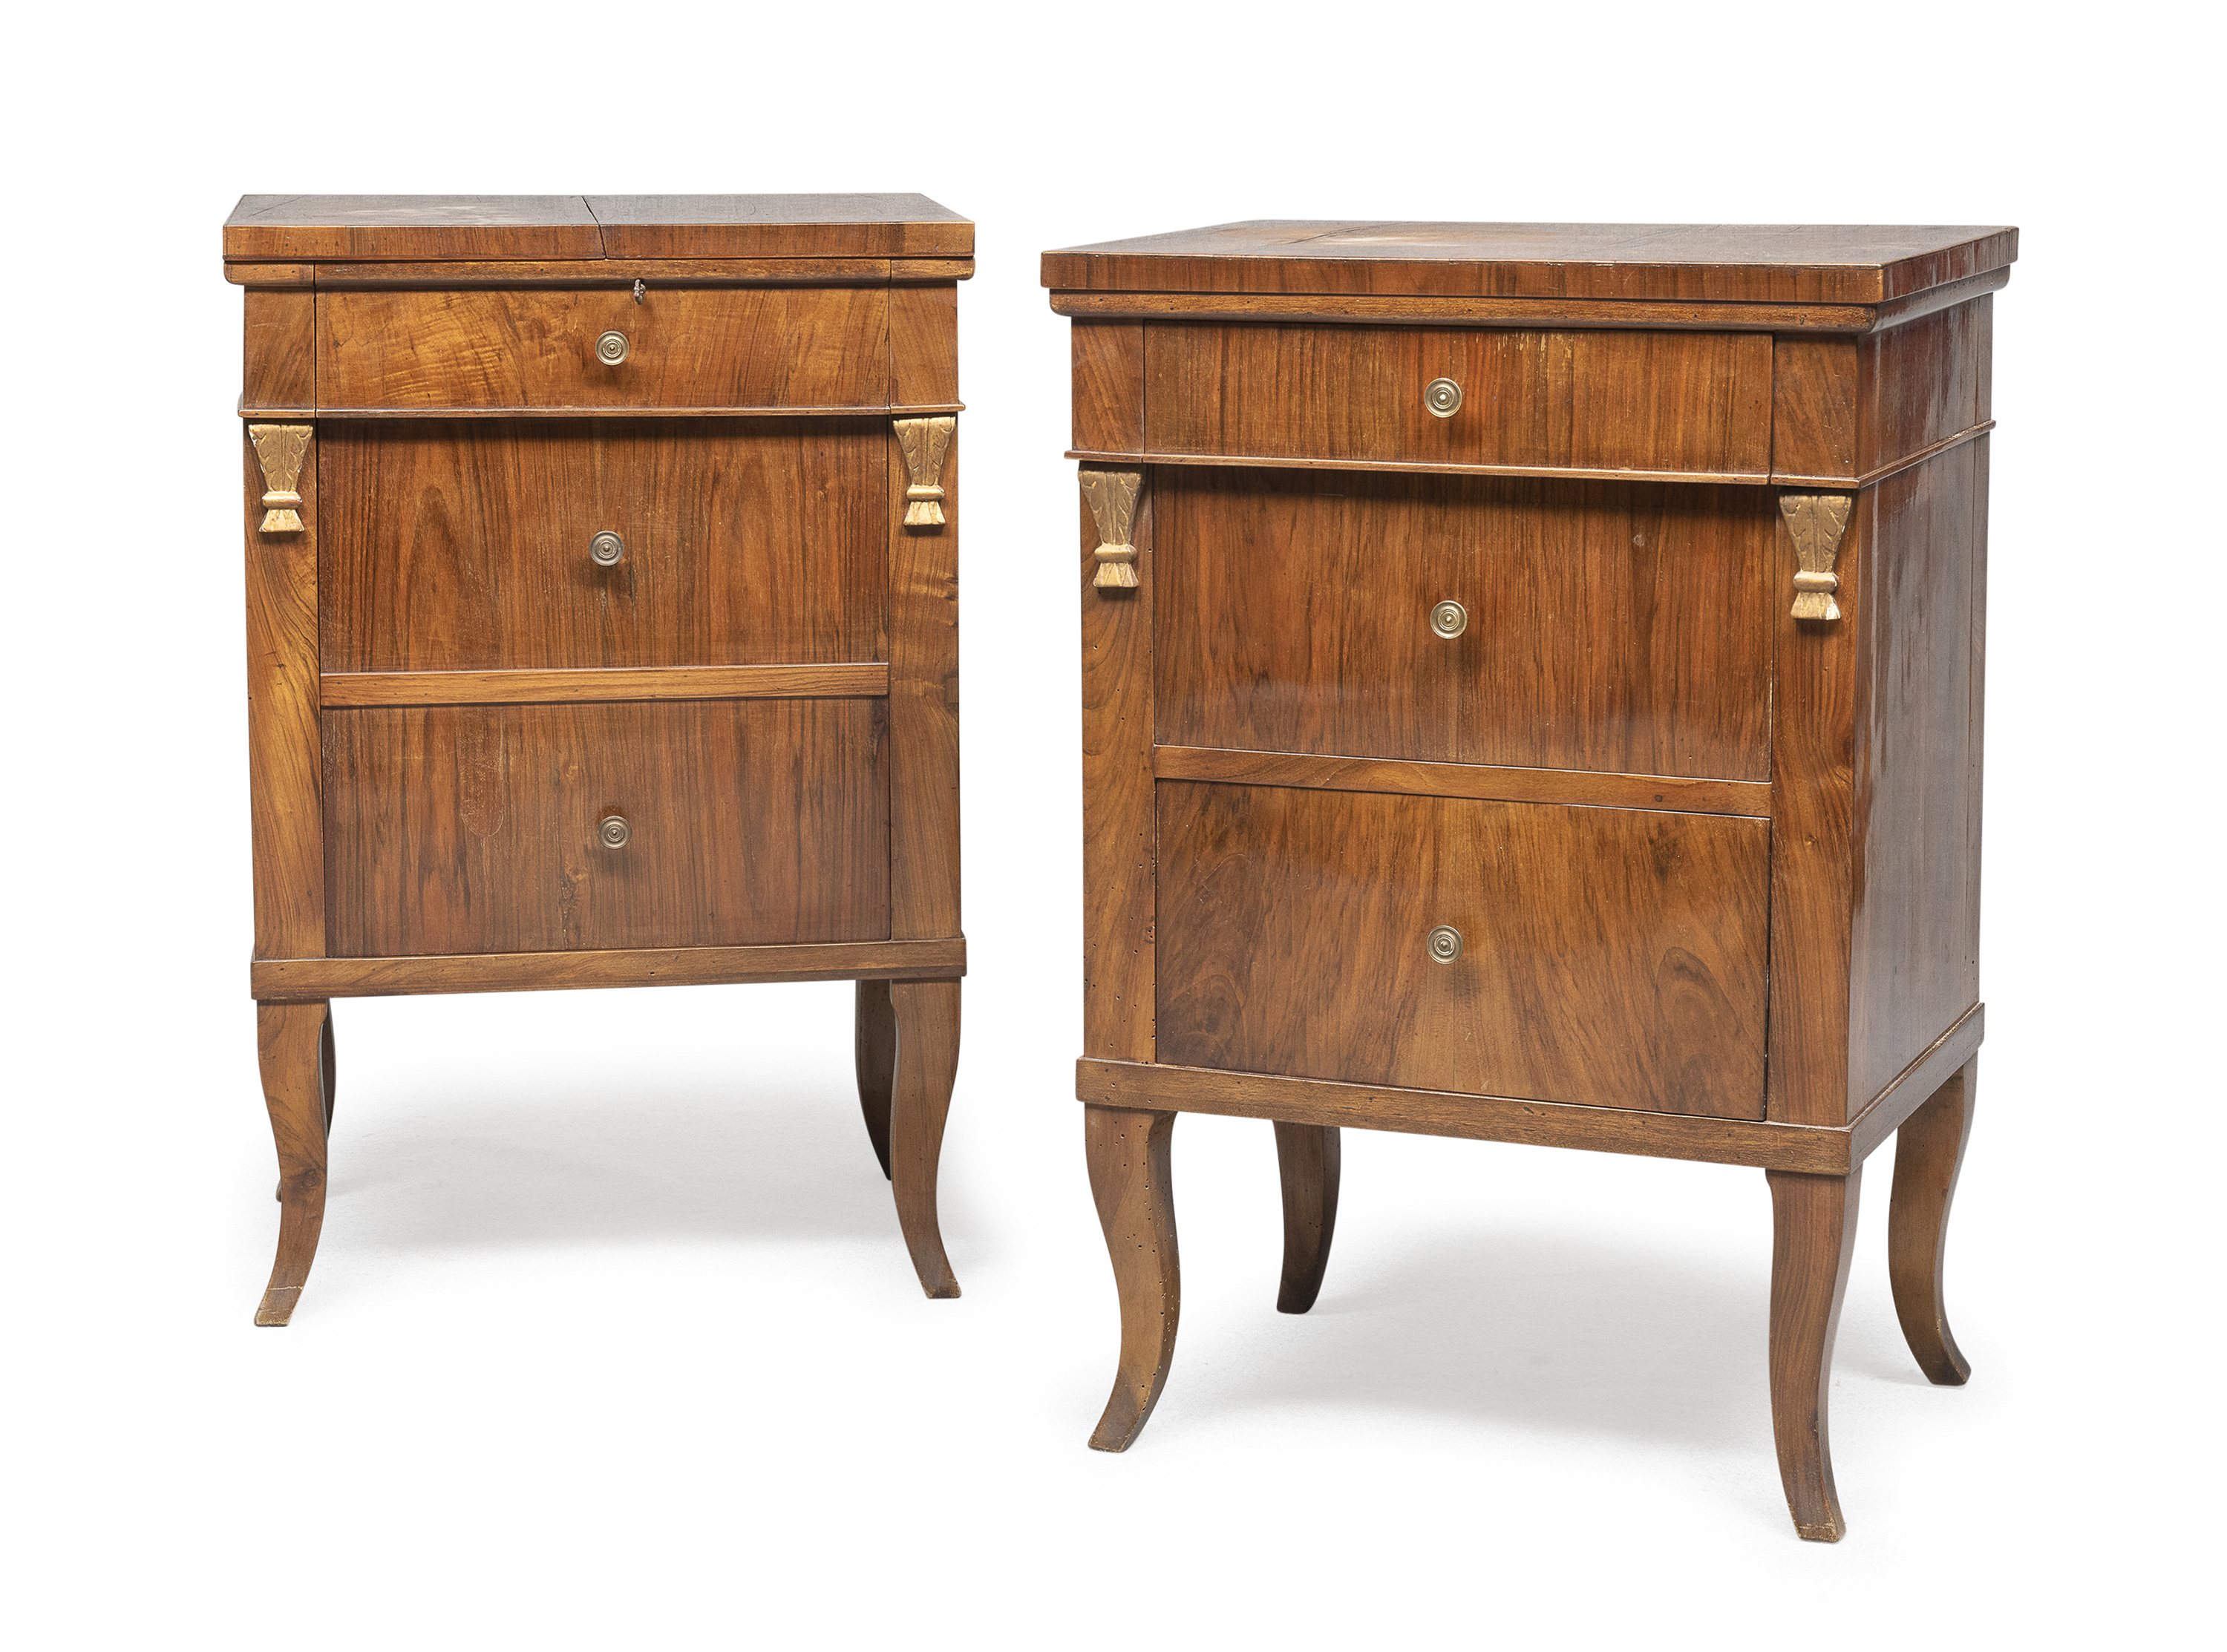 PAIR OF WALNUT BEDSIDE TABLES CENTRAL ITALY EARLY 19TH CENTURY